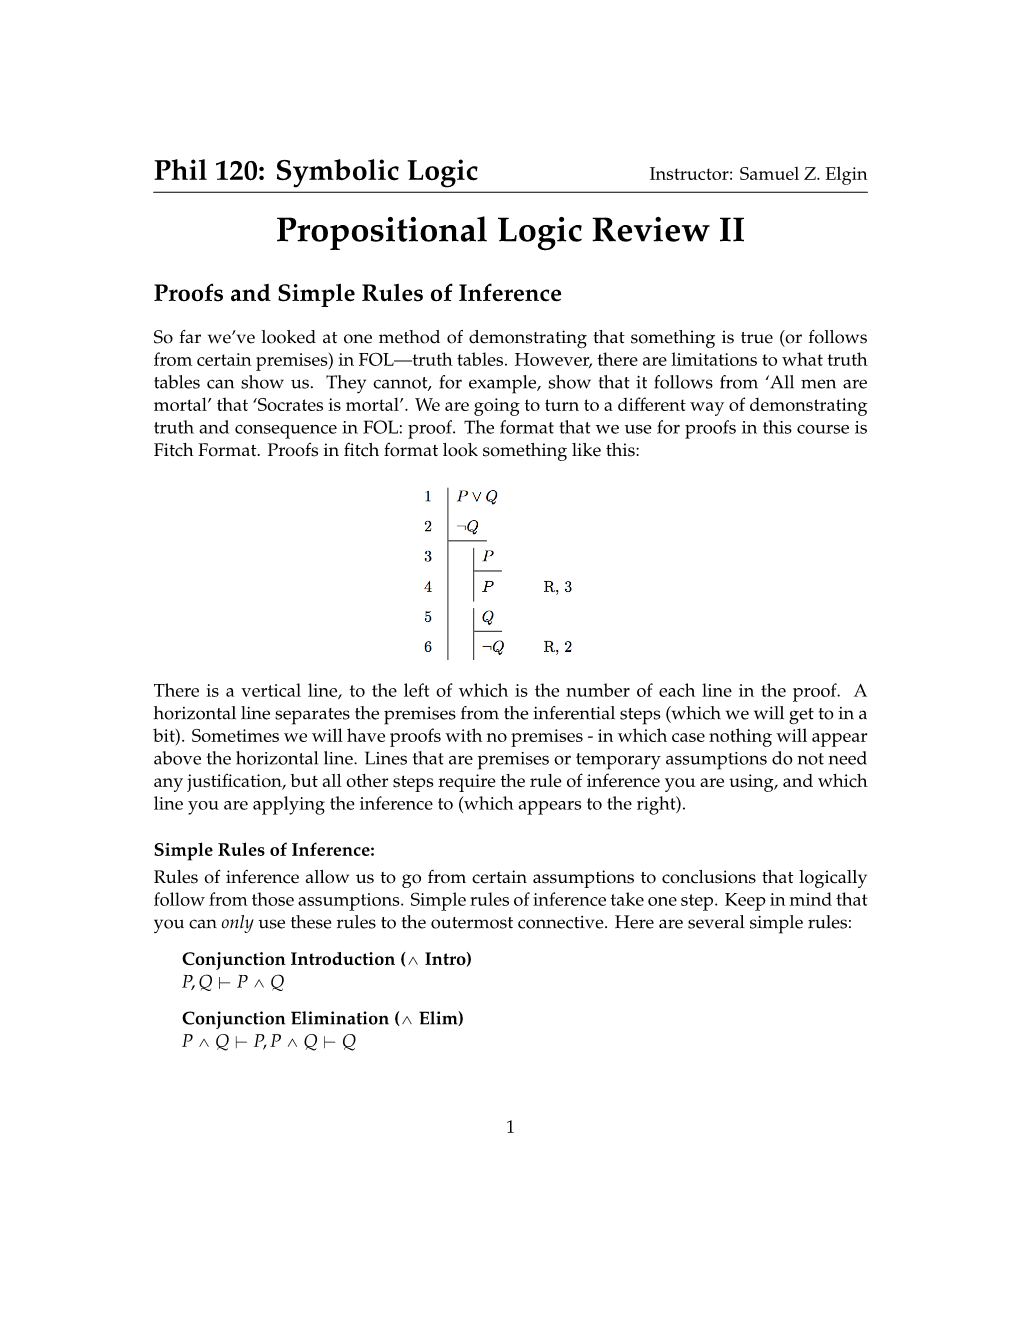 Propositional Logic Review II